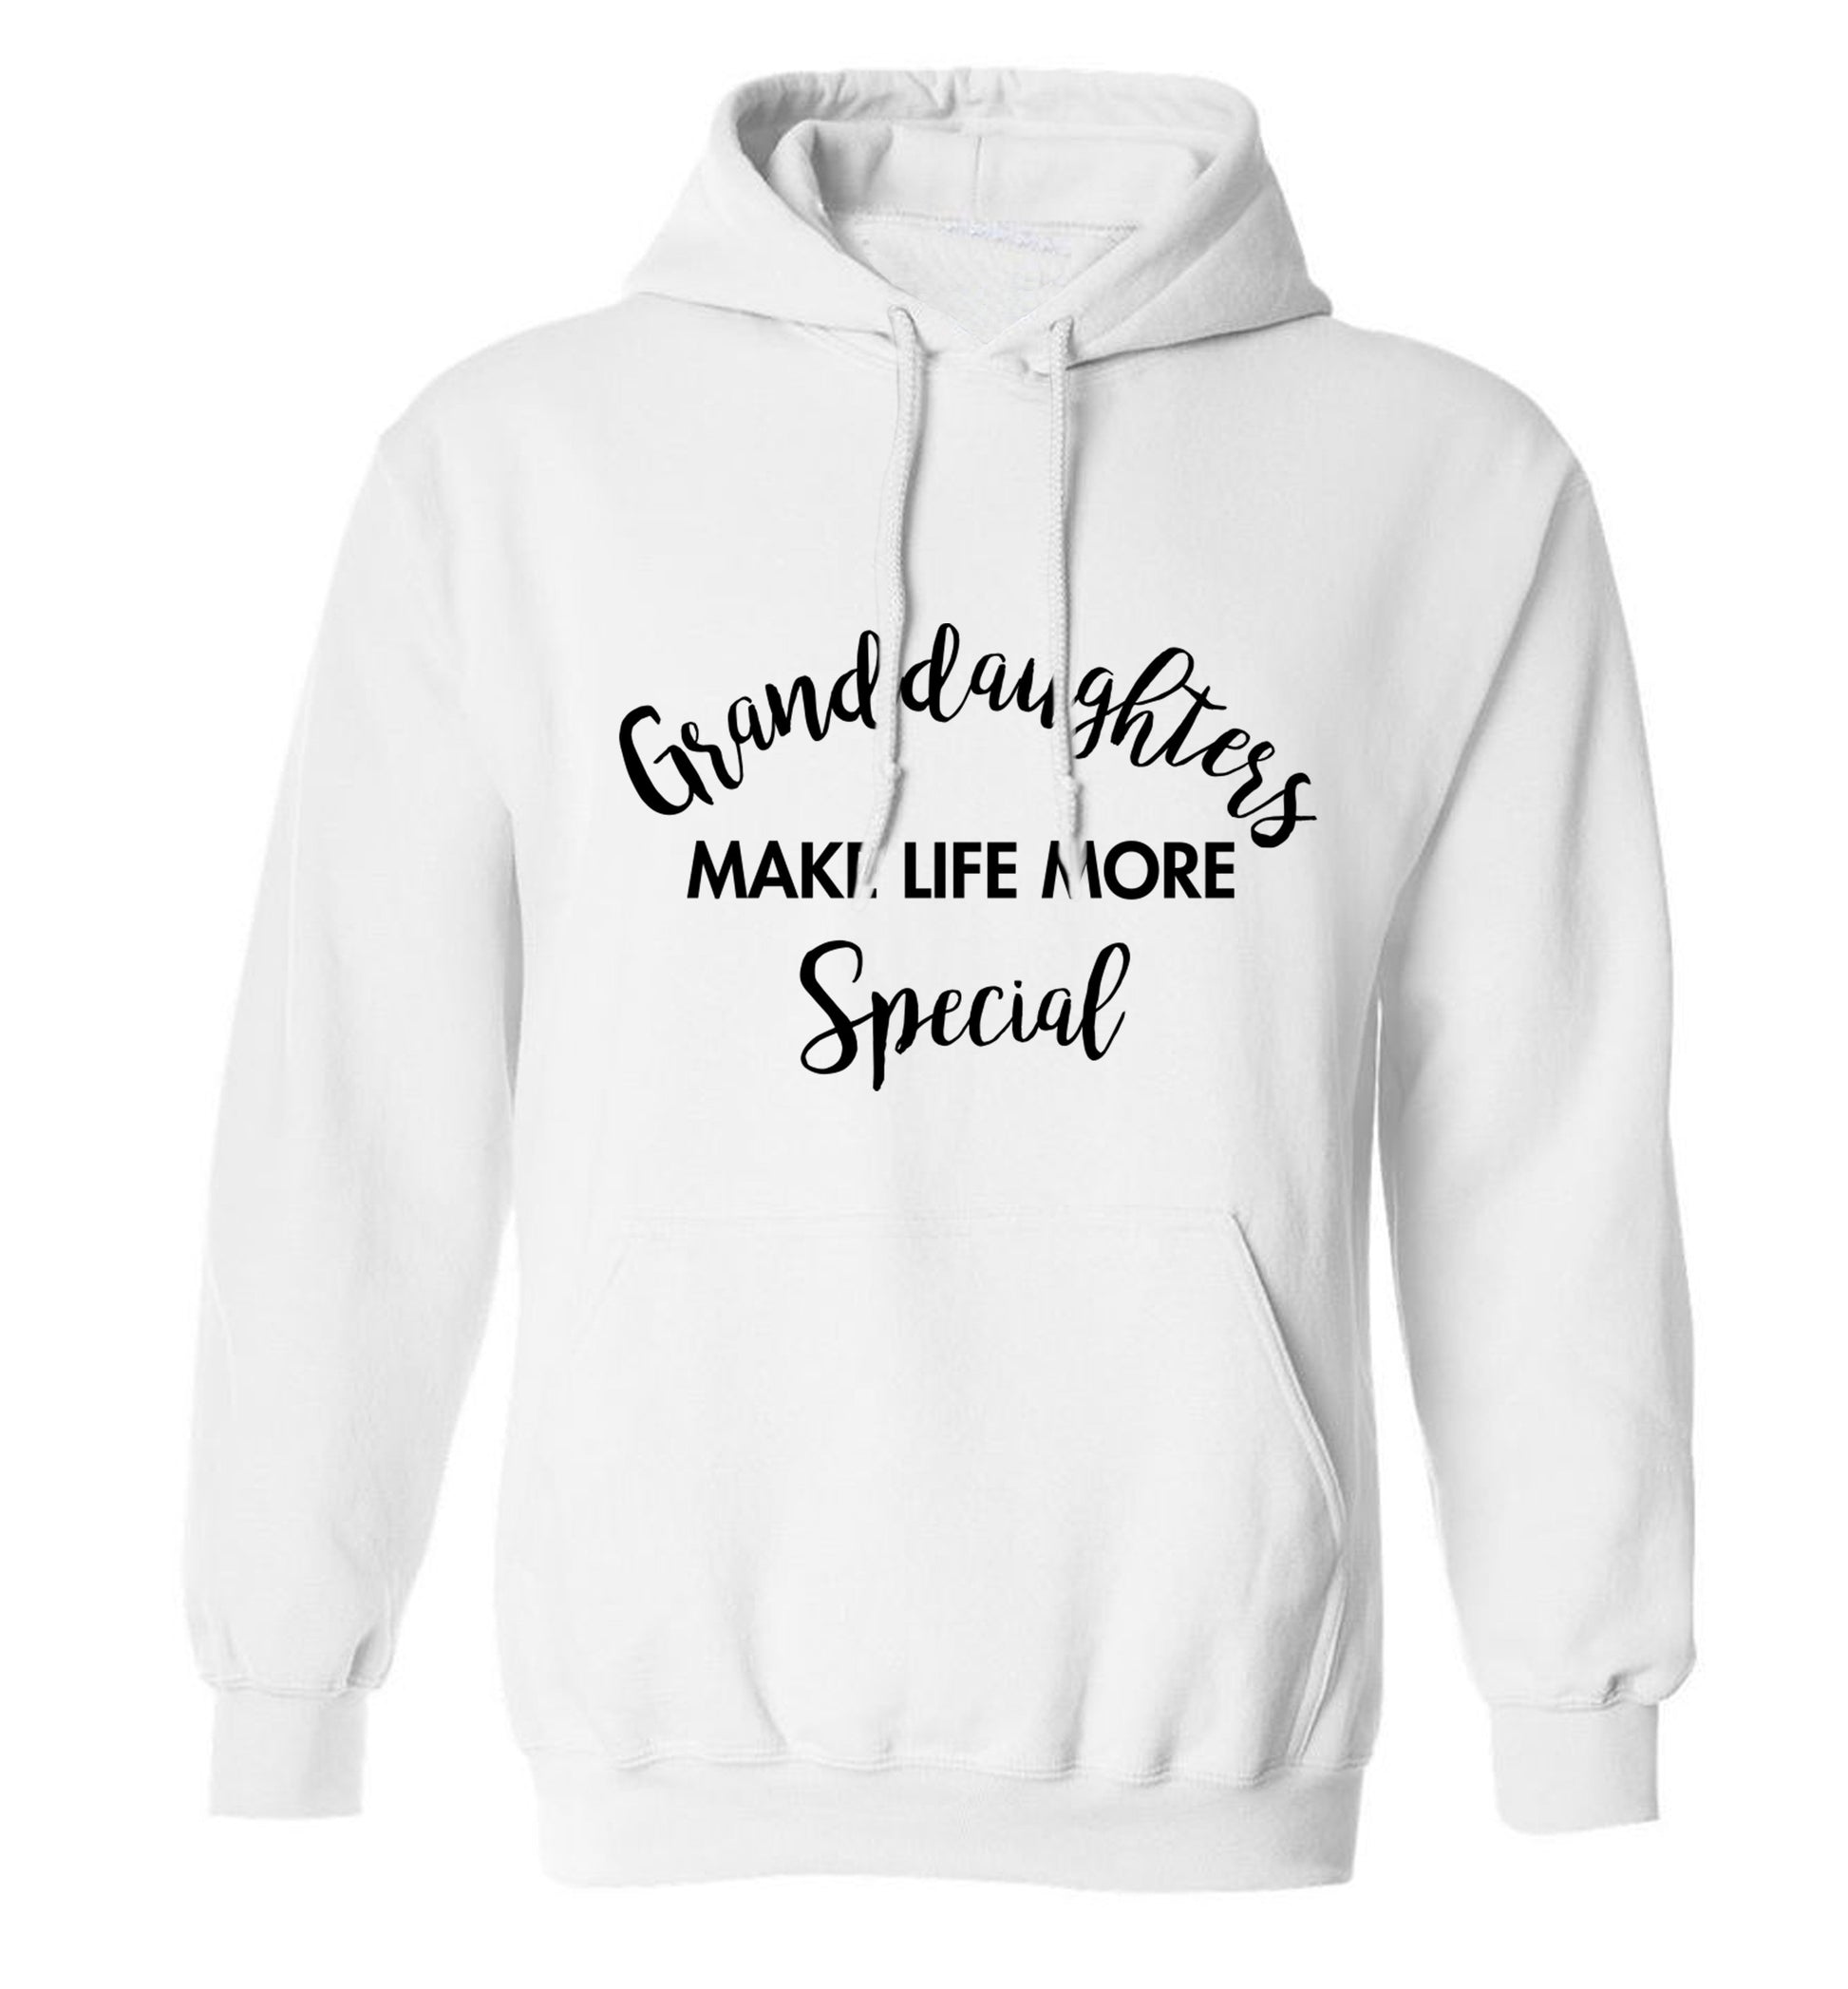 Granddaughters make life more special adults unisex white hoodie 2XL